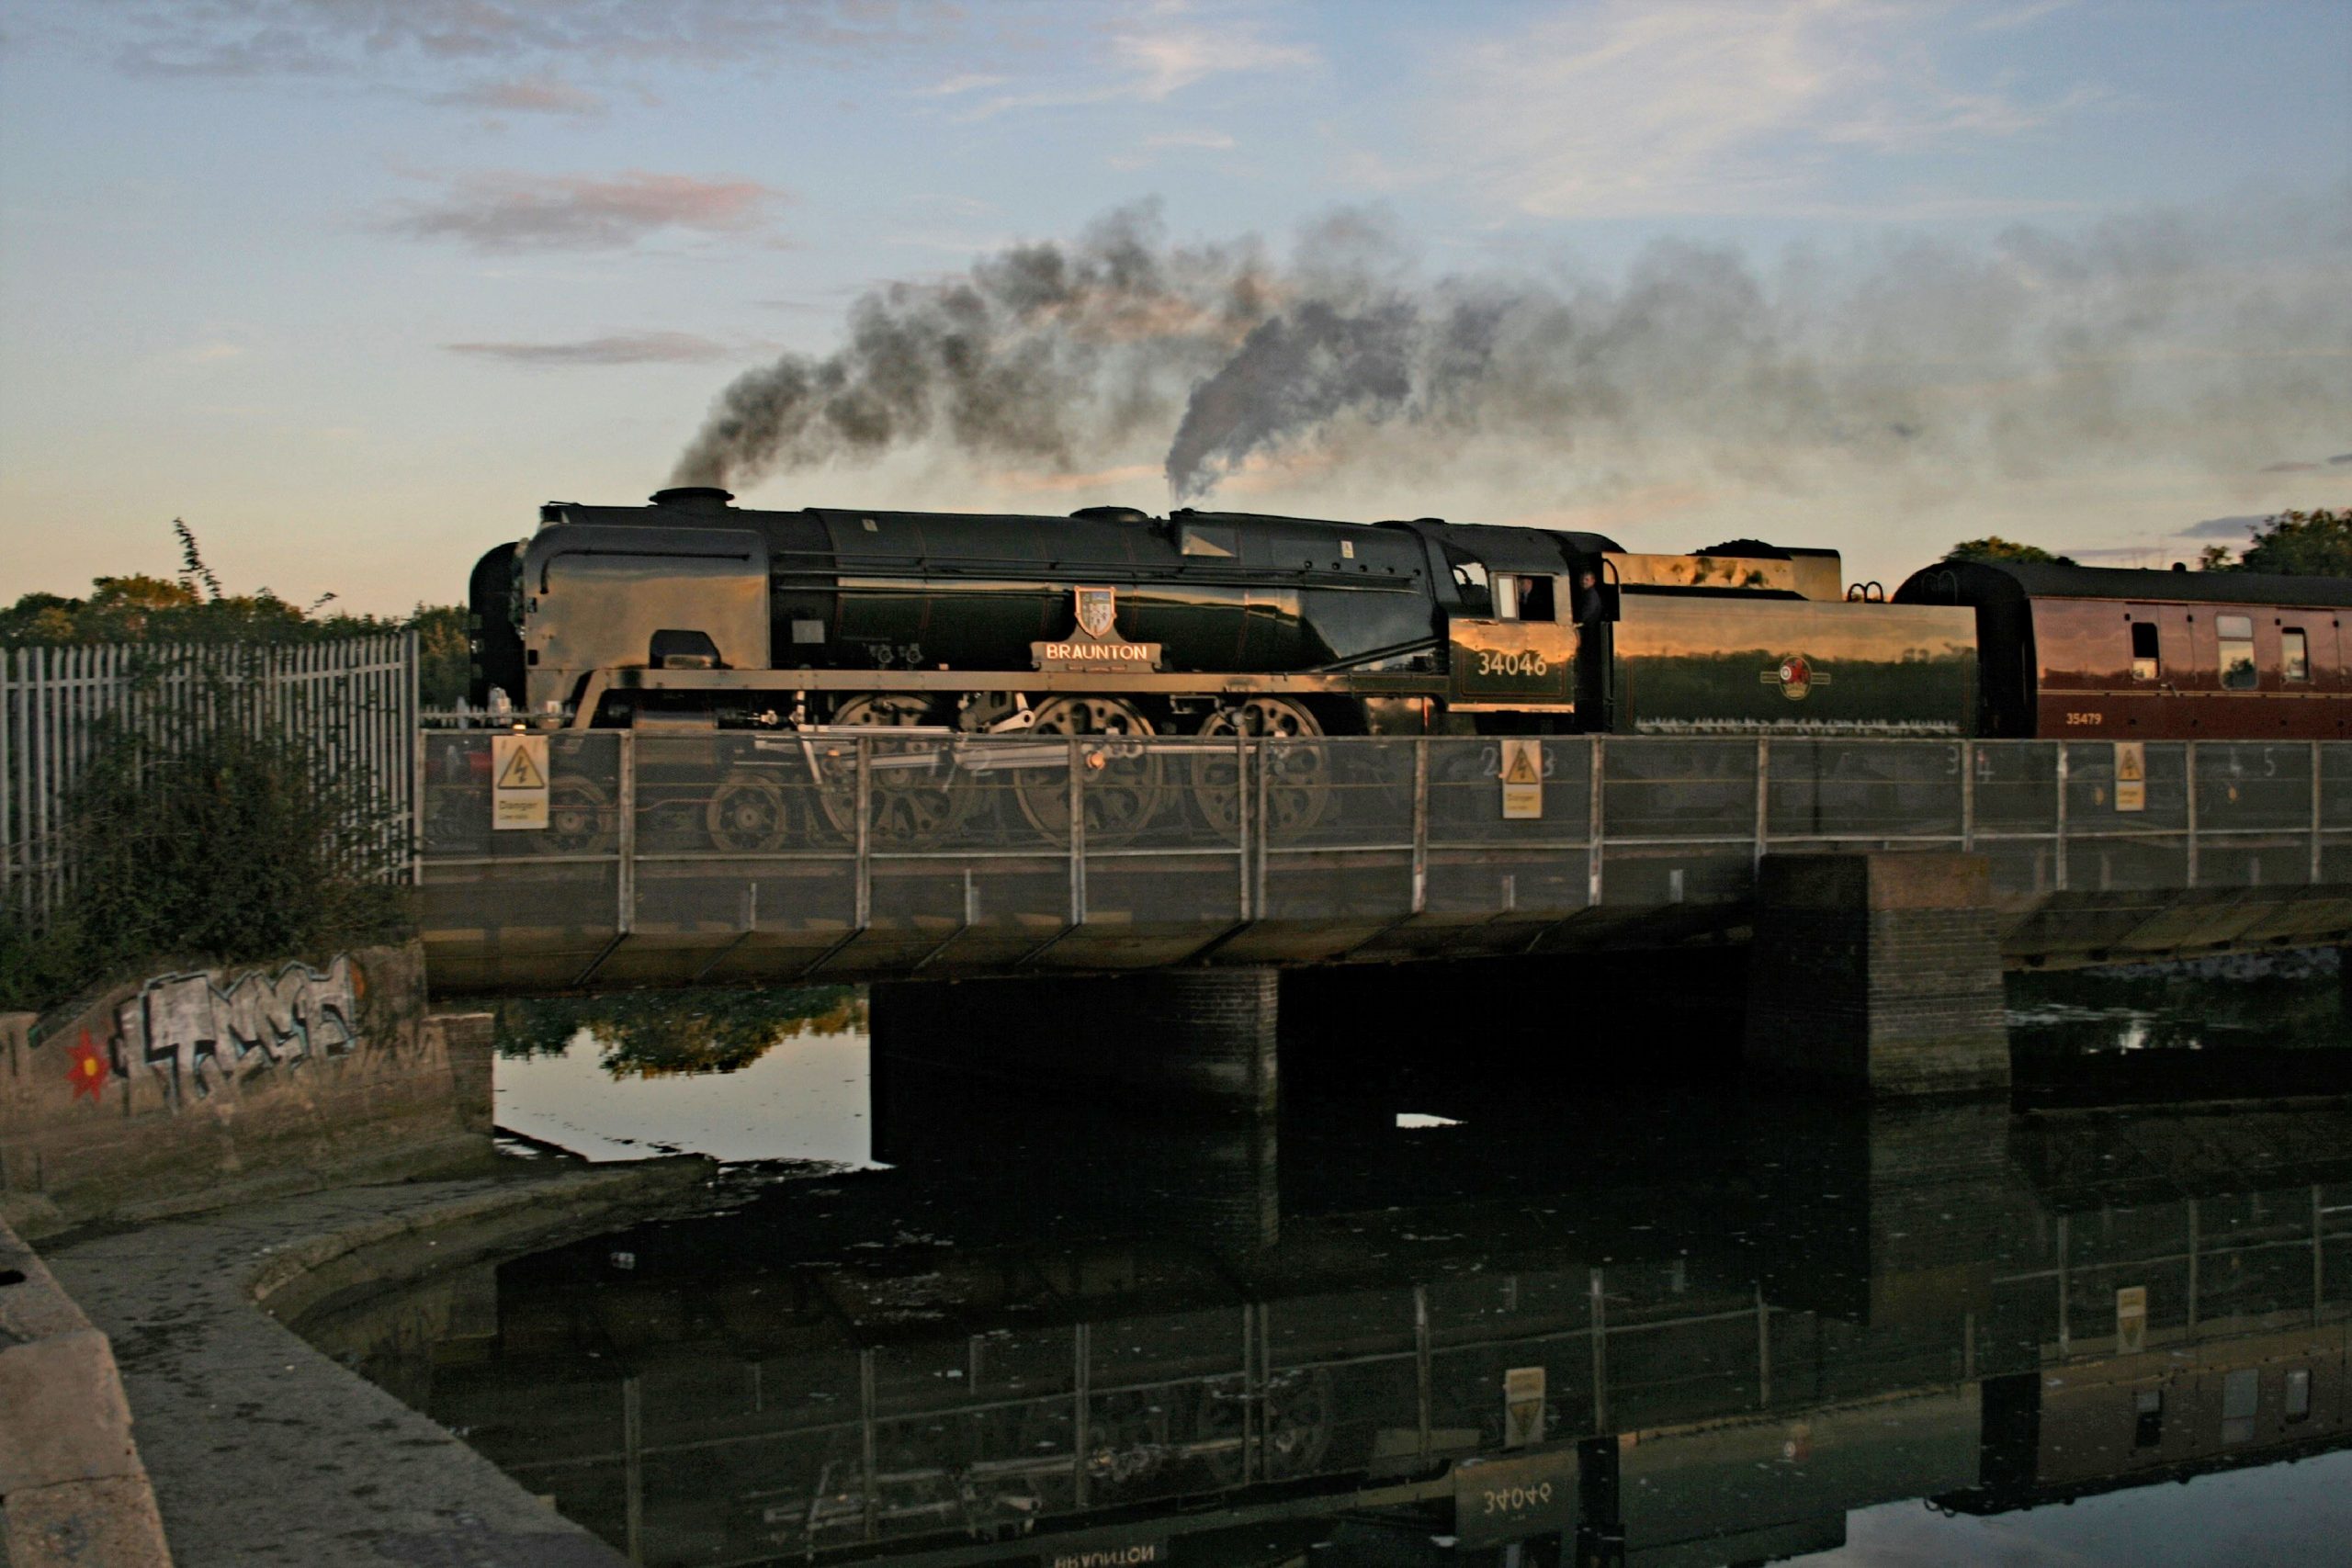 As dusk descends West Country Bulleid Pacific 34046 'Braunton' passes over Portcreek, North of Hilsea, with 1Z52 the 18:14 Chichester to Paddington, Goodwood revival return excursion. The train has reversed at Fratton with a class 47 at the head from Chichester, subsequently remaining on the rear through to London. 18 September 2022. Image Credit John Barrowdale.